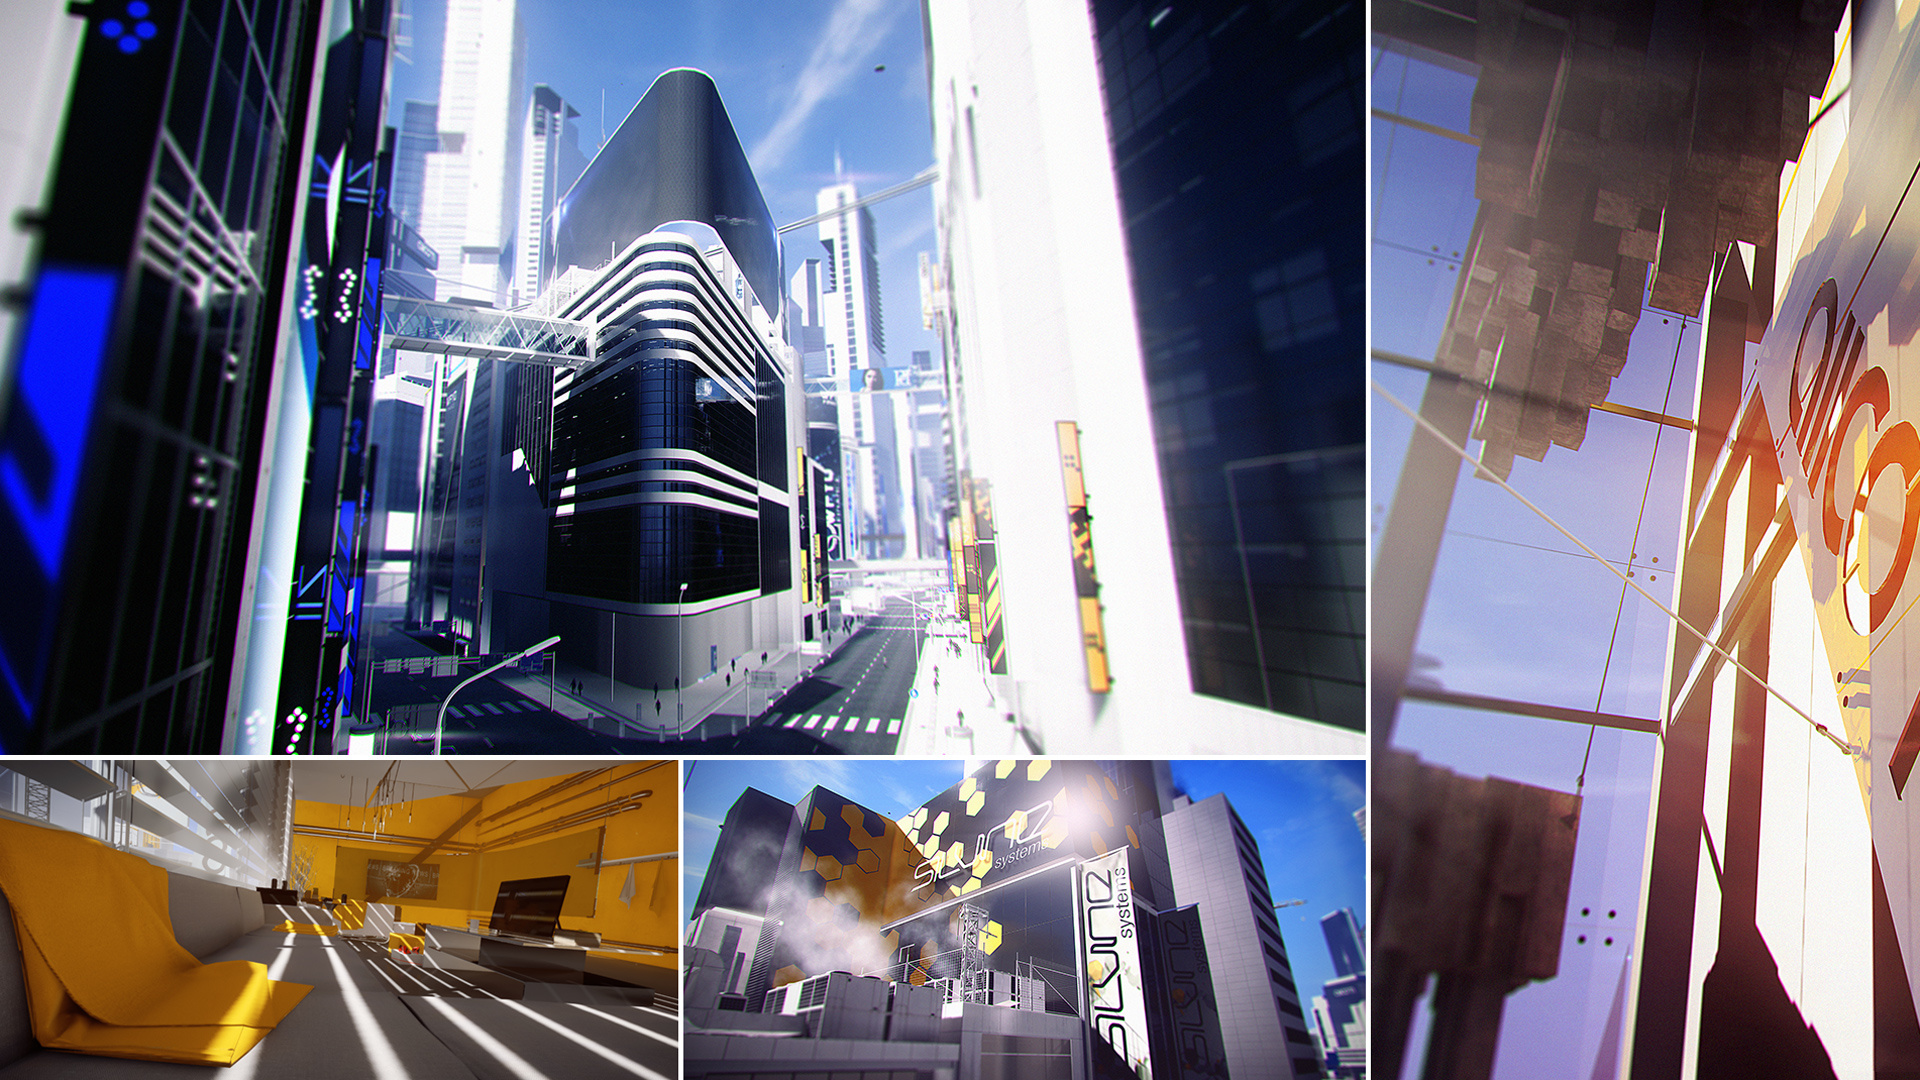 Mirror's Edge Review - Welcome to the City